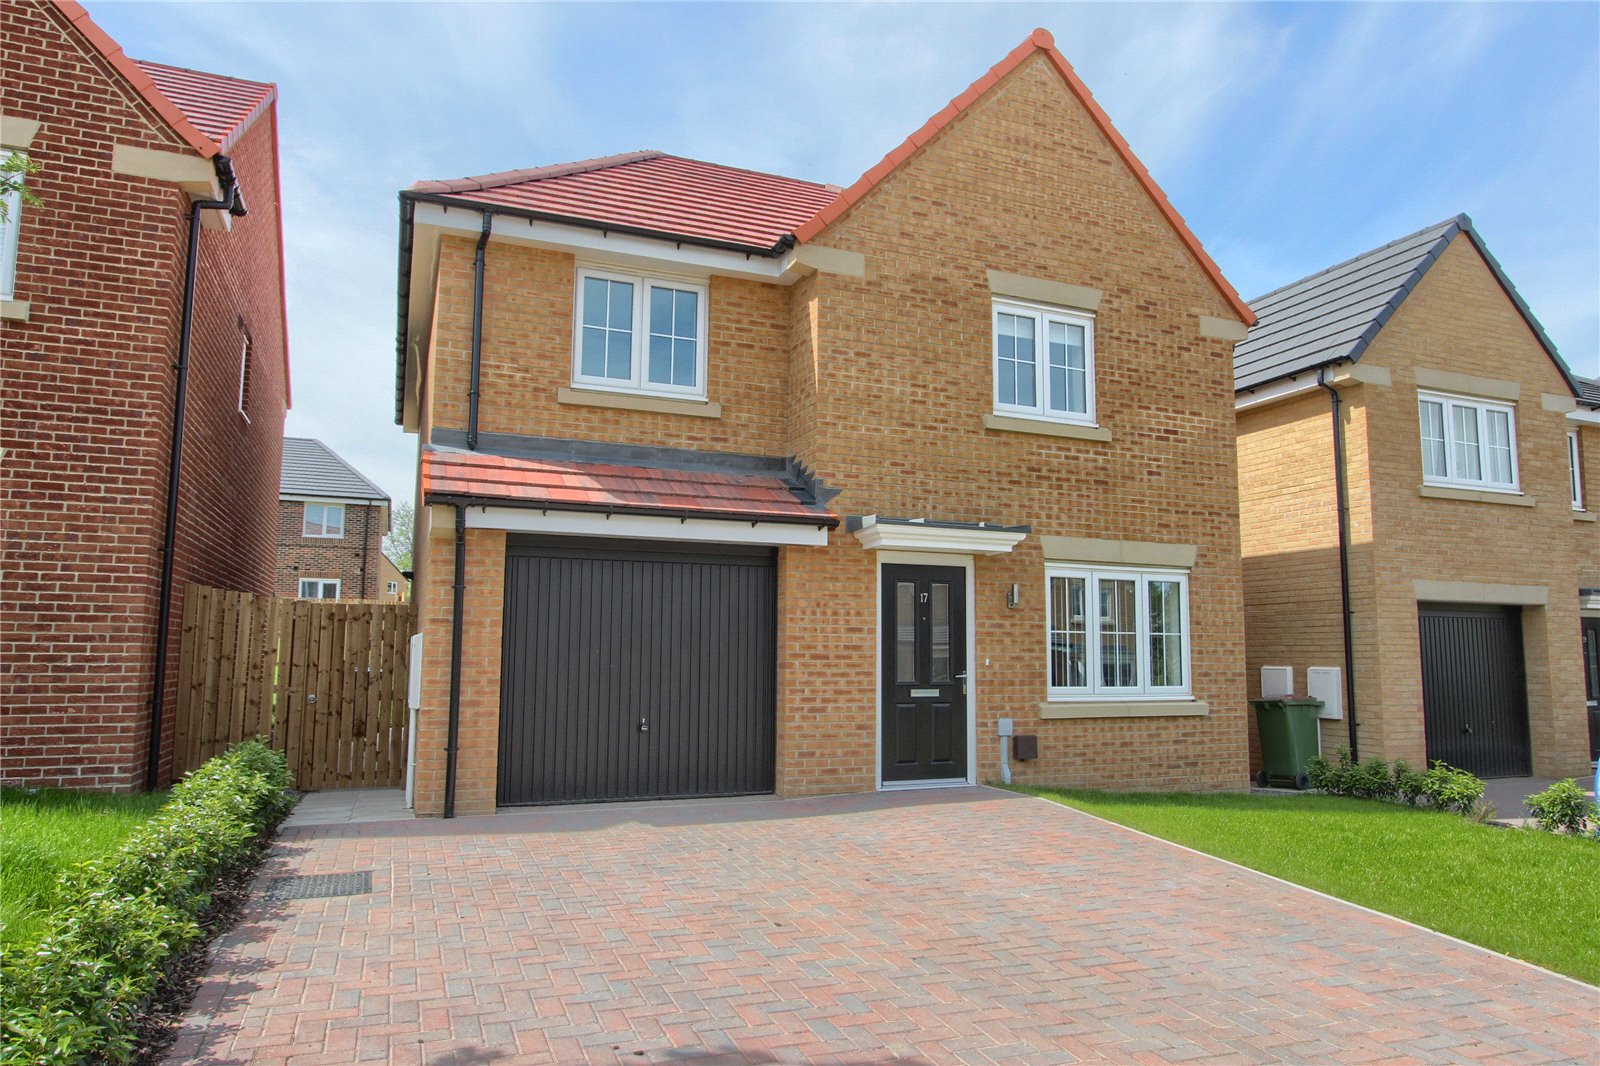 4 bed house for sale in Whinfell Drive, Normanby 1